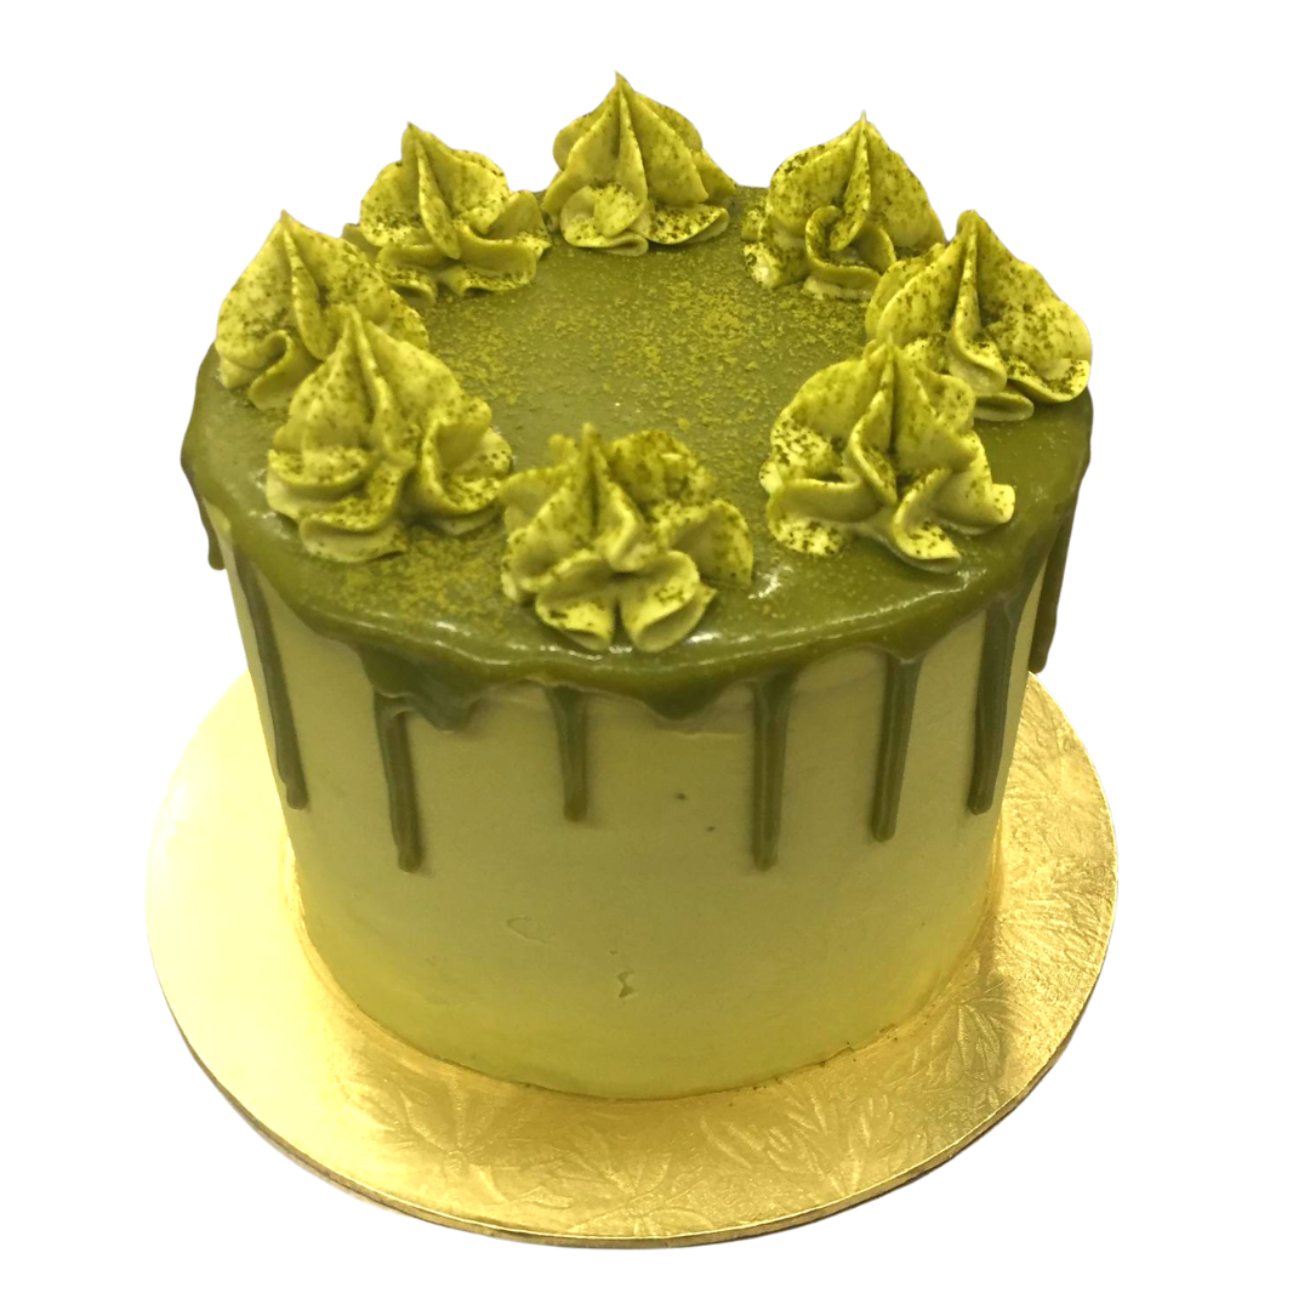 The Ultimate Matcha Cake Baked in London | Anges de Sucre